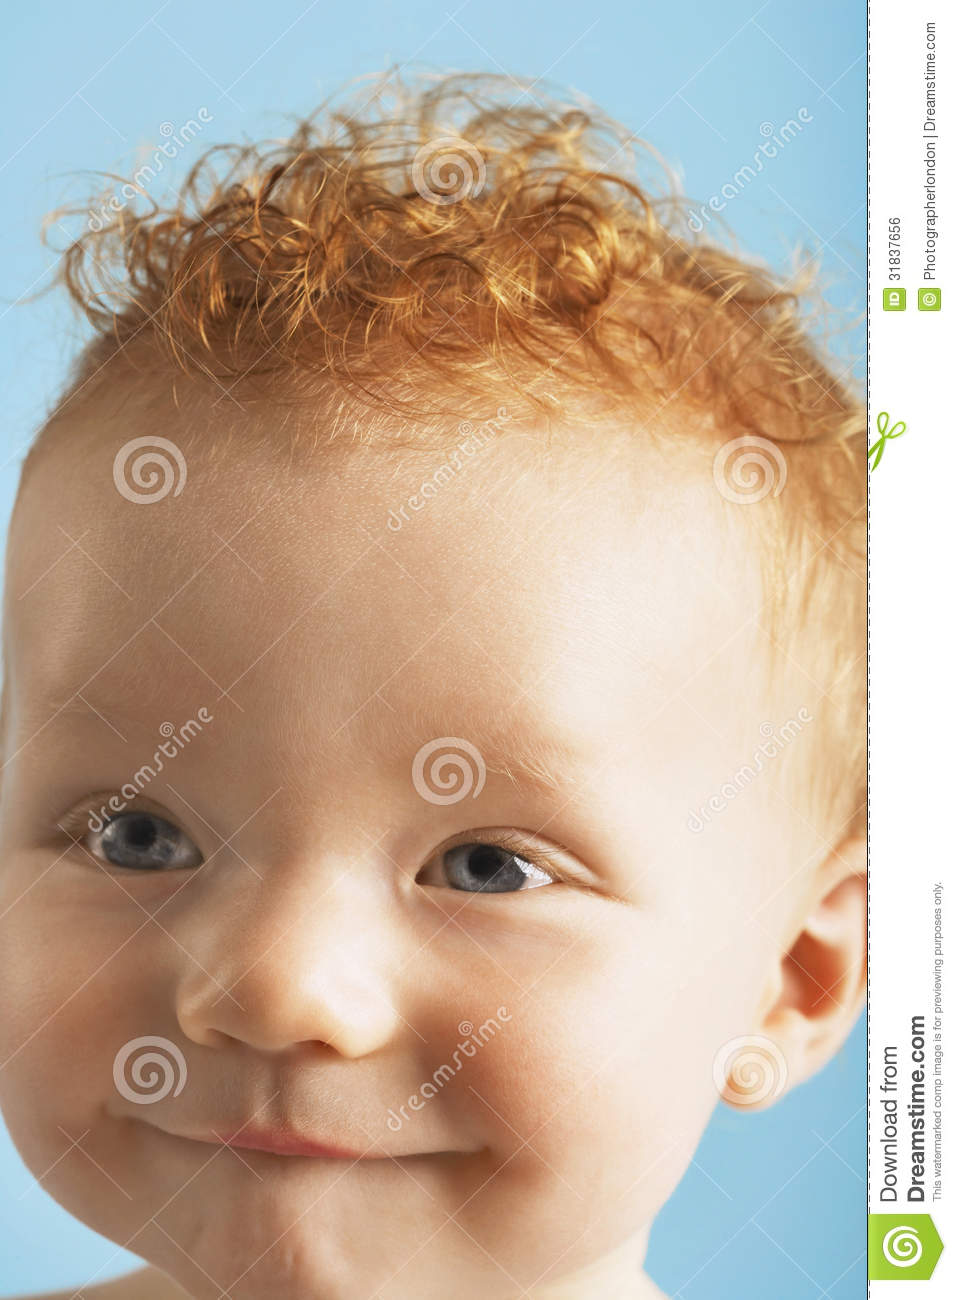 Cute Baby With Pursed Lips Royalty Free Stock Image   Image  31837656